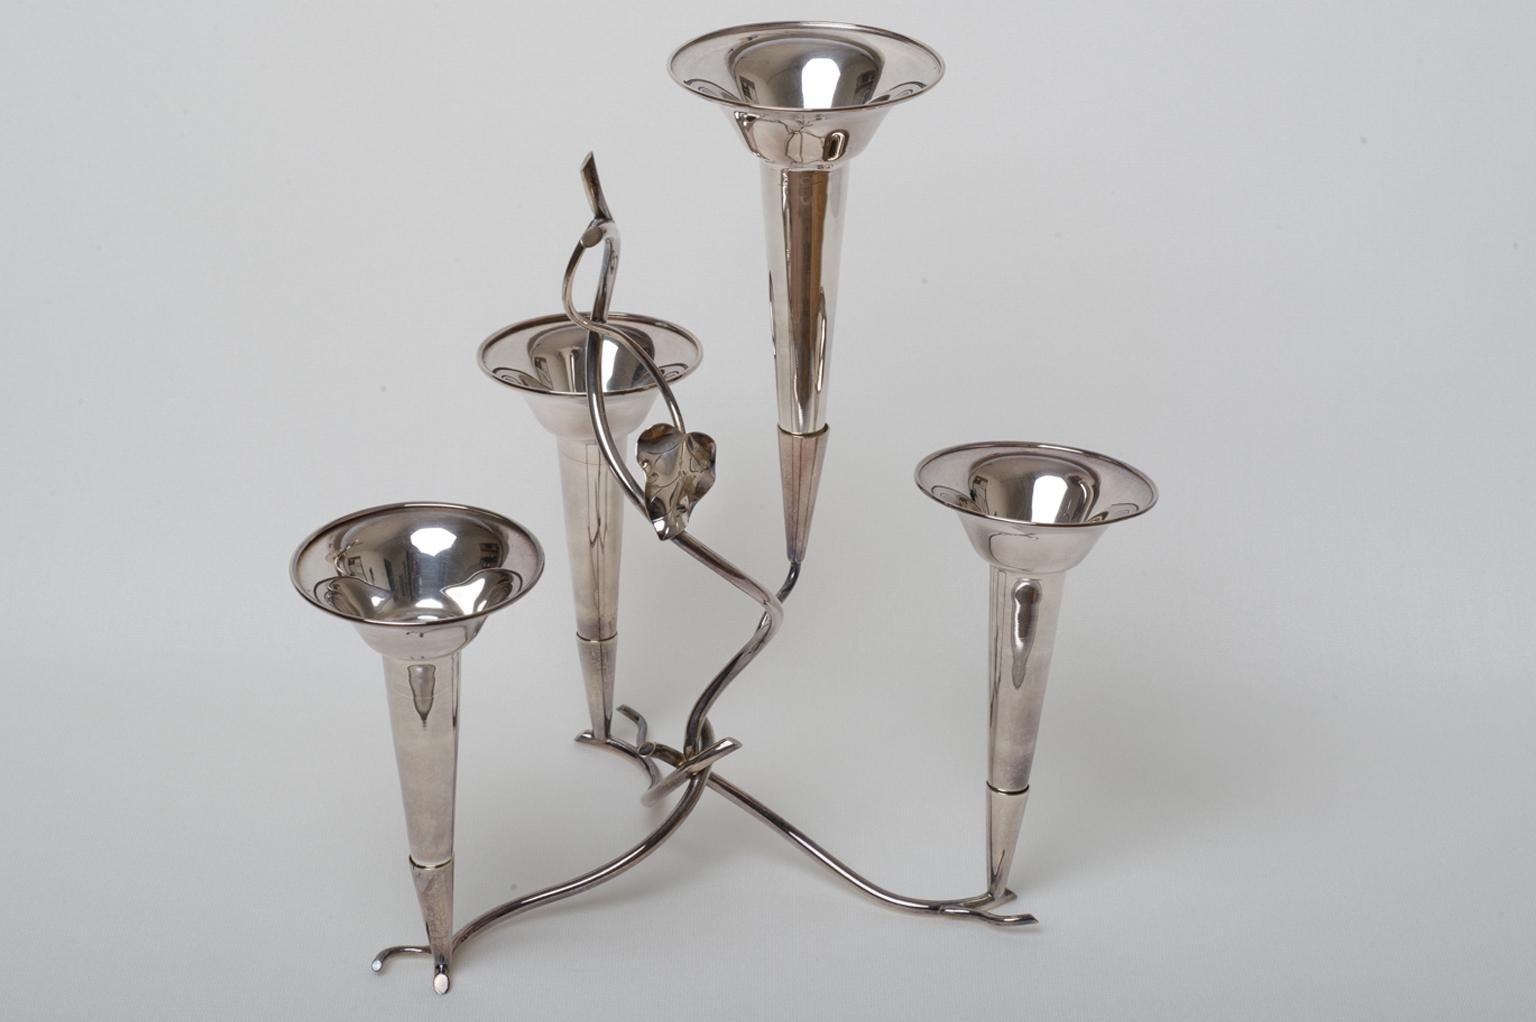 Simple but nice épergne in silver plate for Your table ornament, specially for Christmas: with candles, flowers and fruits all around.  Just a few flowers are enough to refine a table or a piece of furniture in the hall.
I have a large collection of